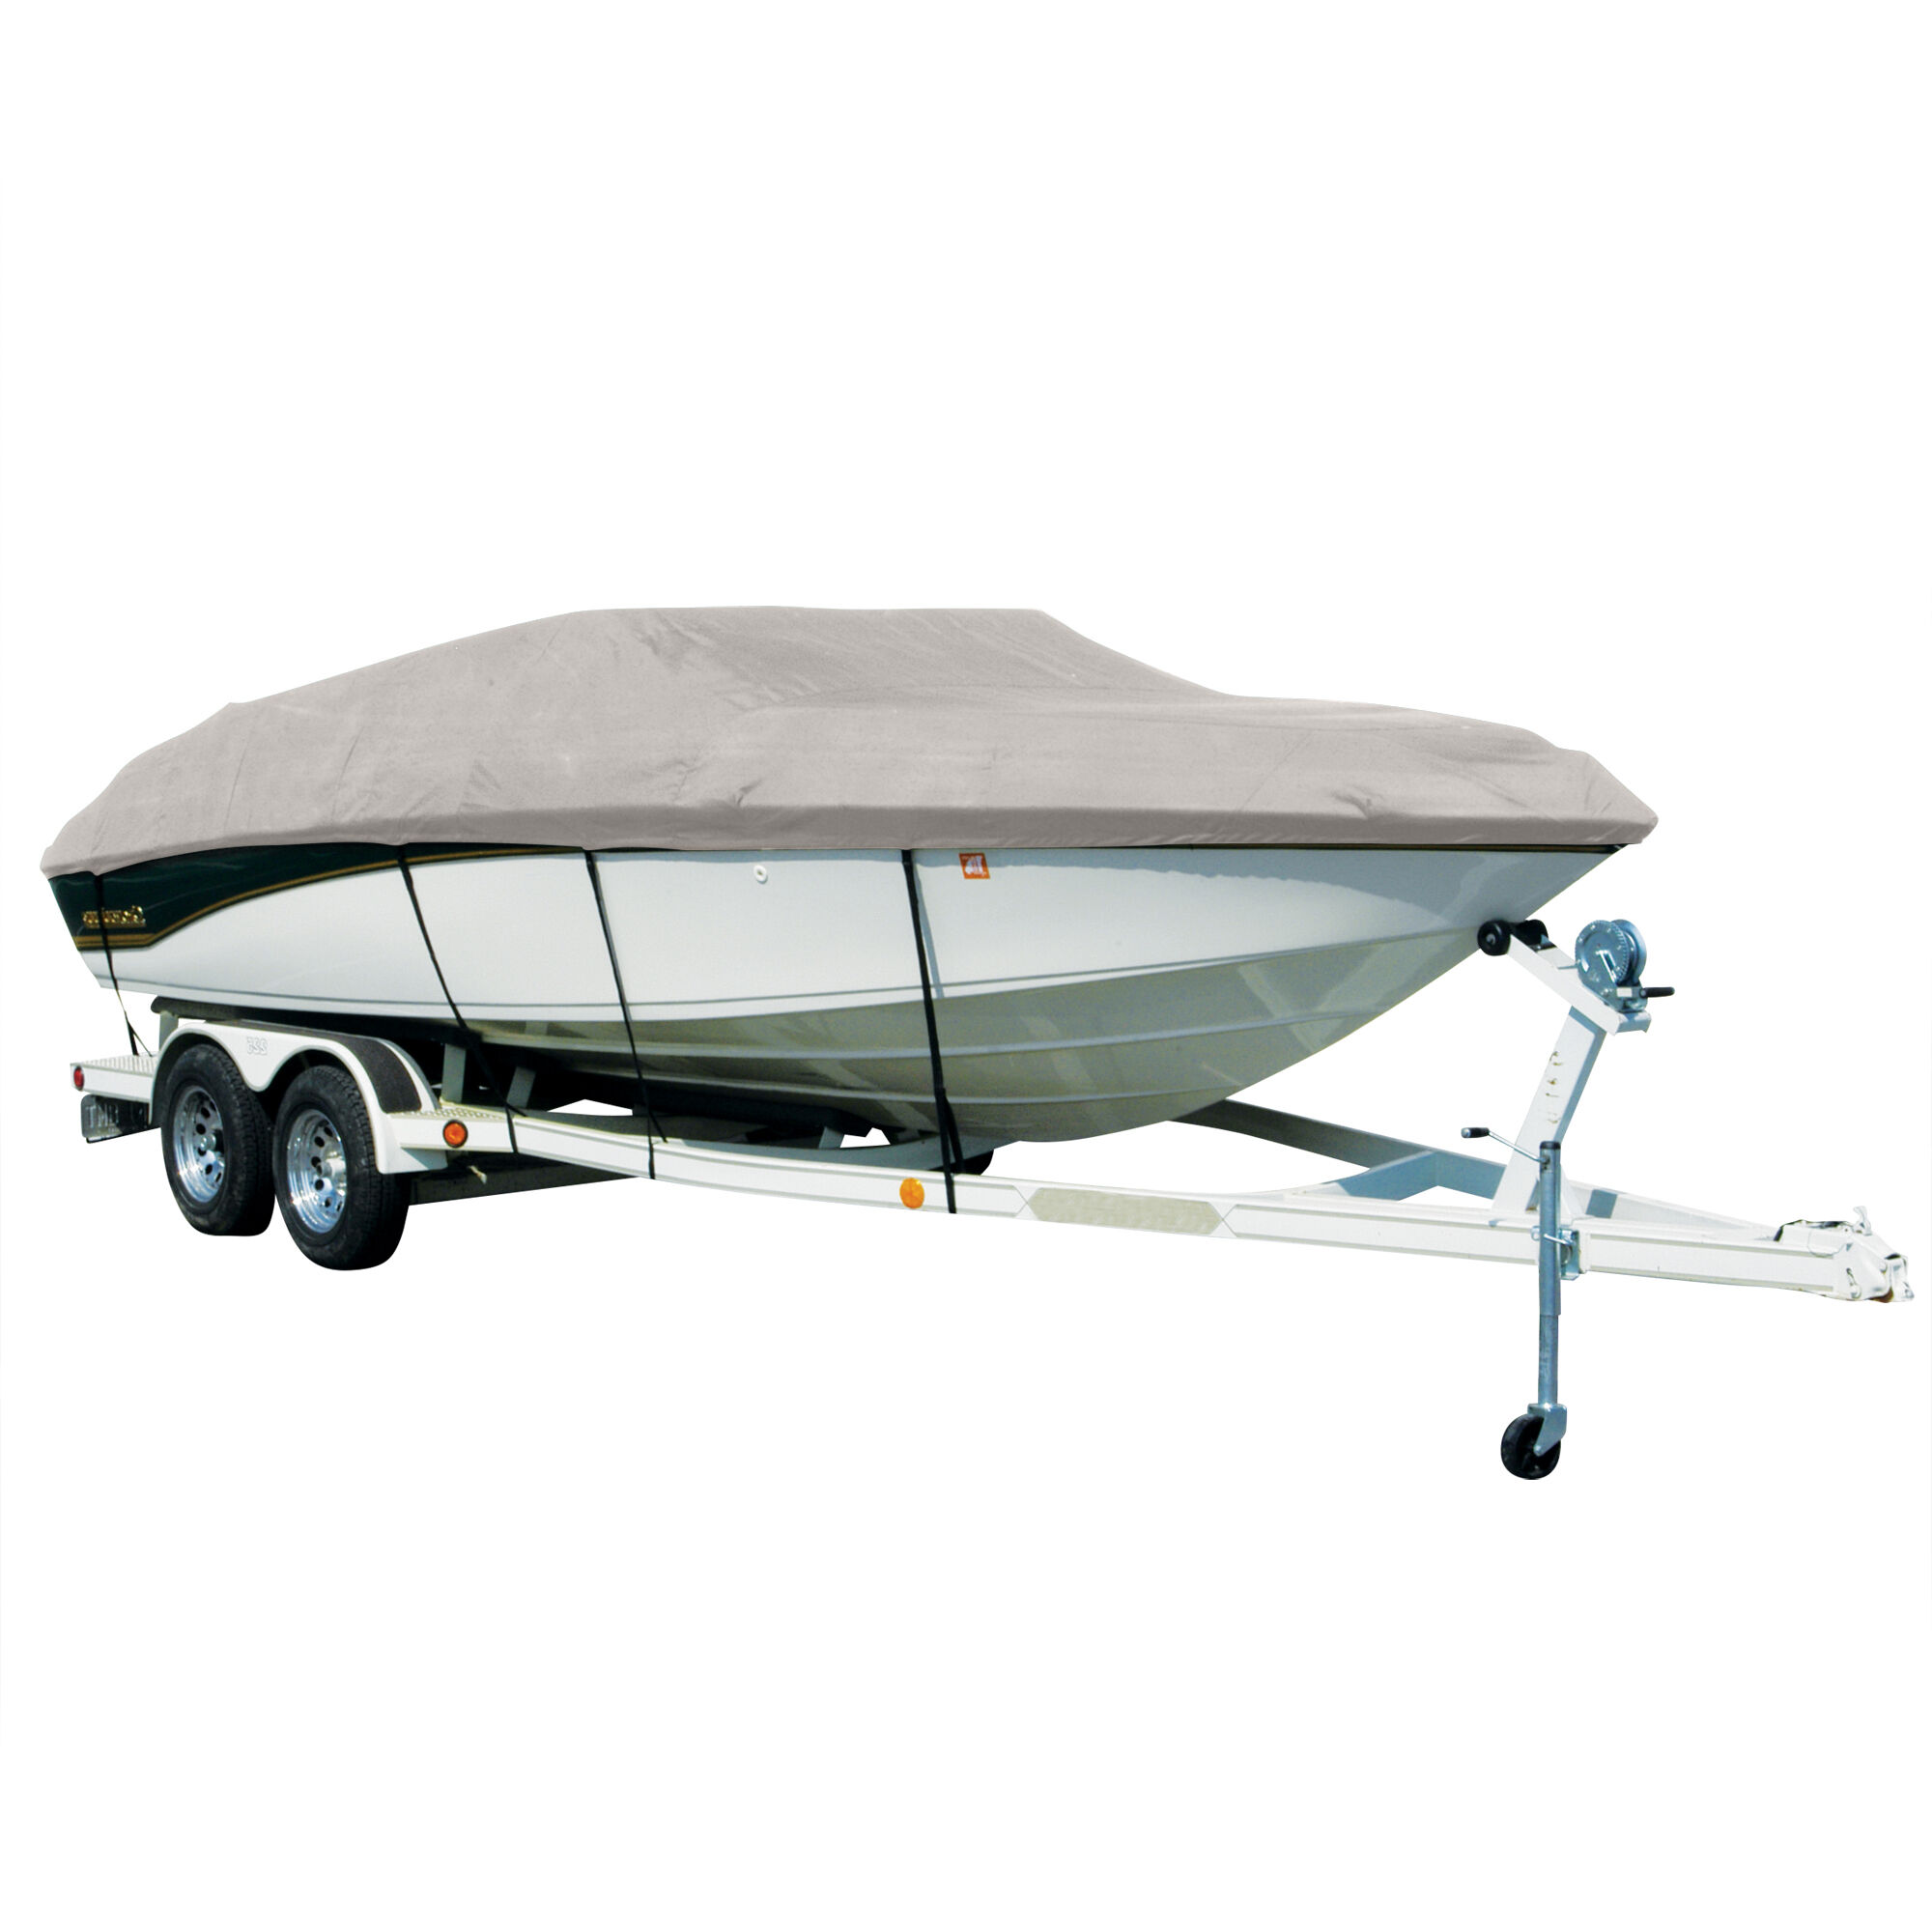 Covermate Sharkskin Plus Exact-Fit Cover for Advantage 22 Party Cat 22 Party Cat I/O. Silver Boat Cover Polyester